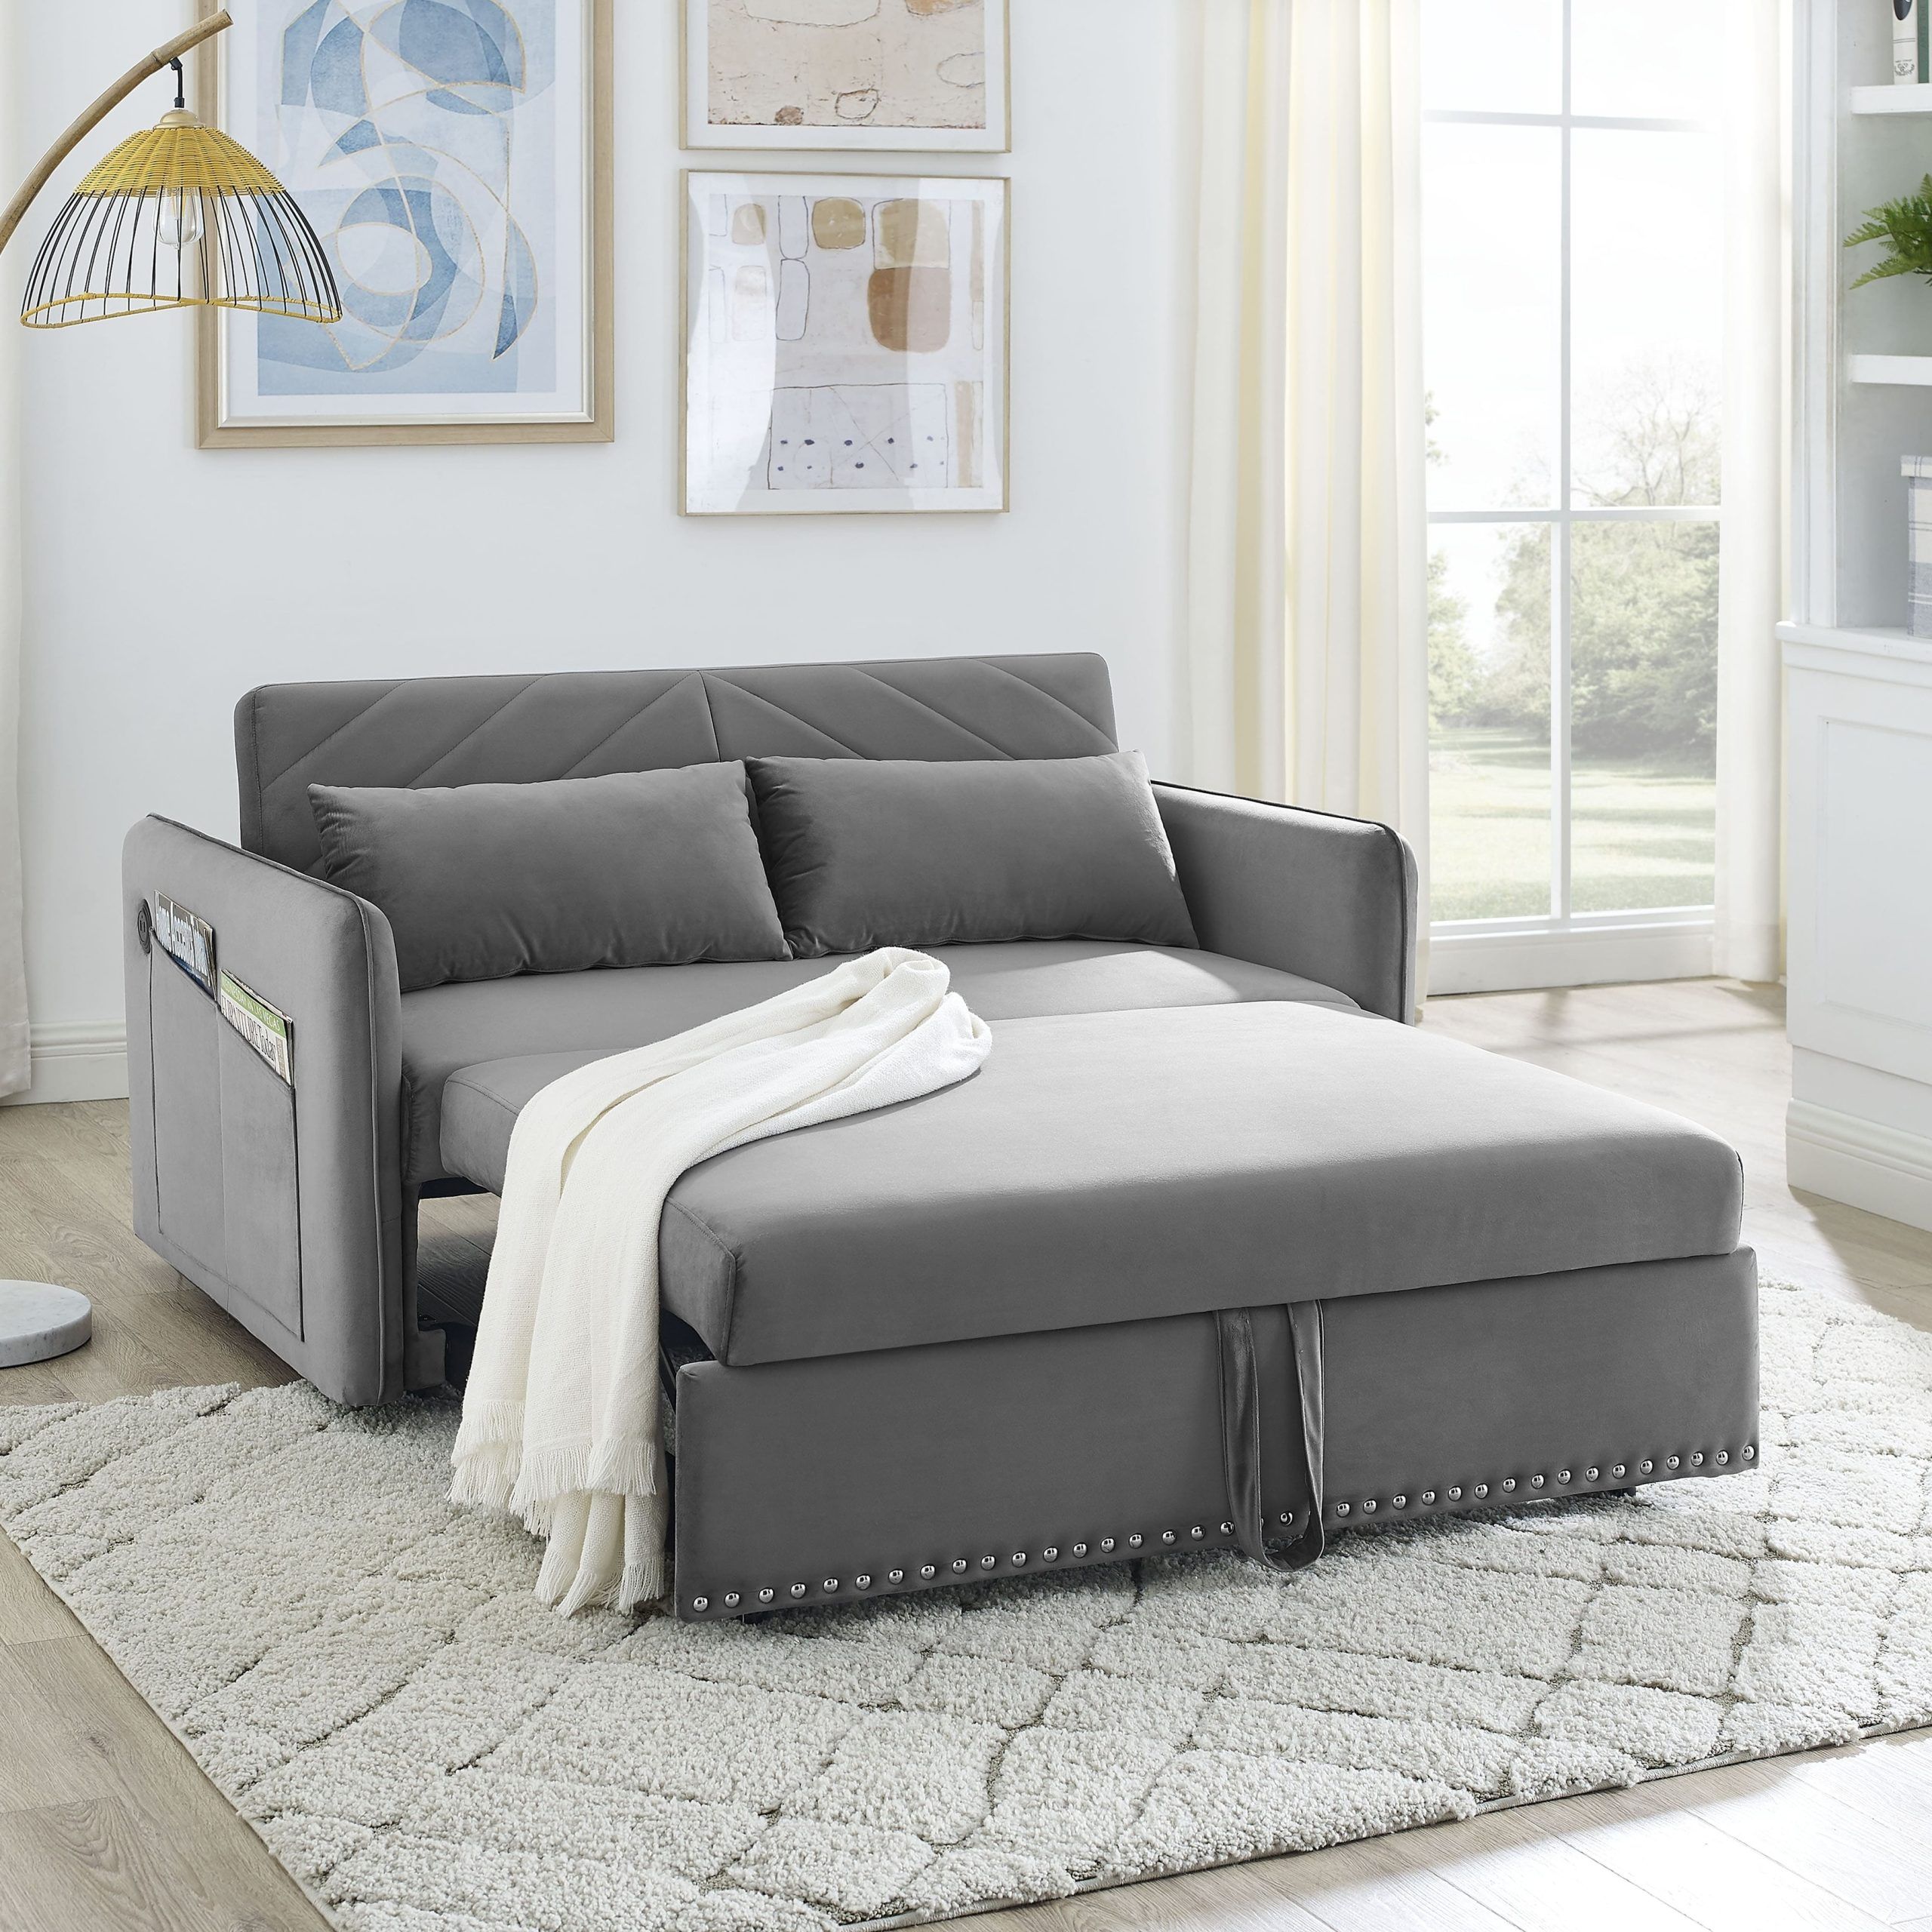 Velvet Pull Out Sleeper Sofa , 3 In 1 Adjustable Sleeper With Pull Out Bed,  2 Lumbar Pillows And Side Pocket – Bed Bath & Beyond – 38084240 Intended For 3 In 1 Gray Pull Out Sleeper Sofas (View 4 of 15)